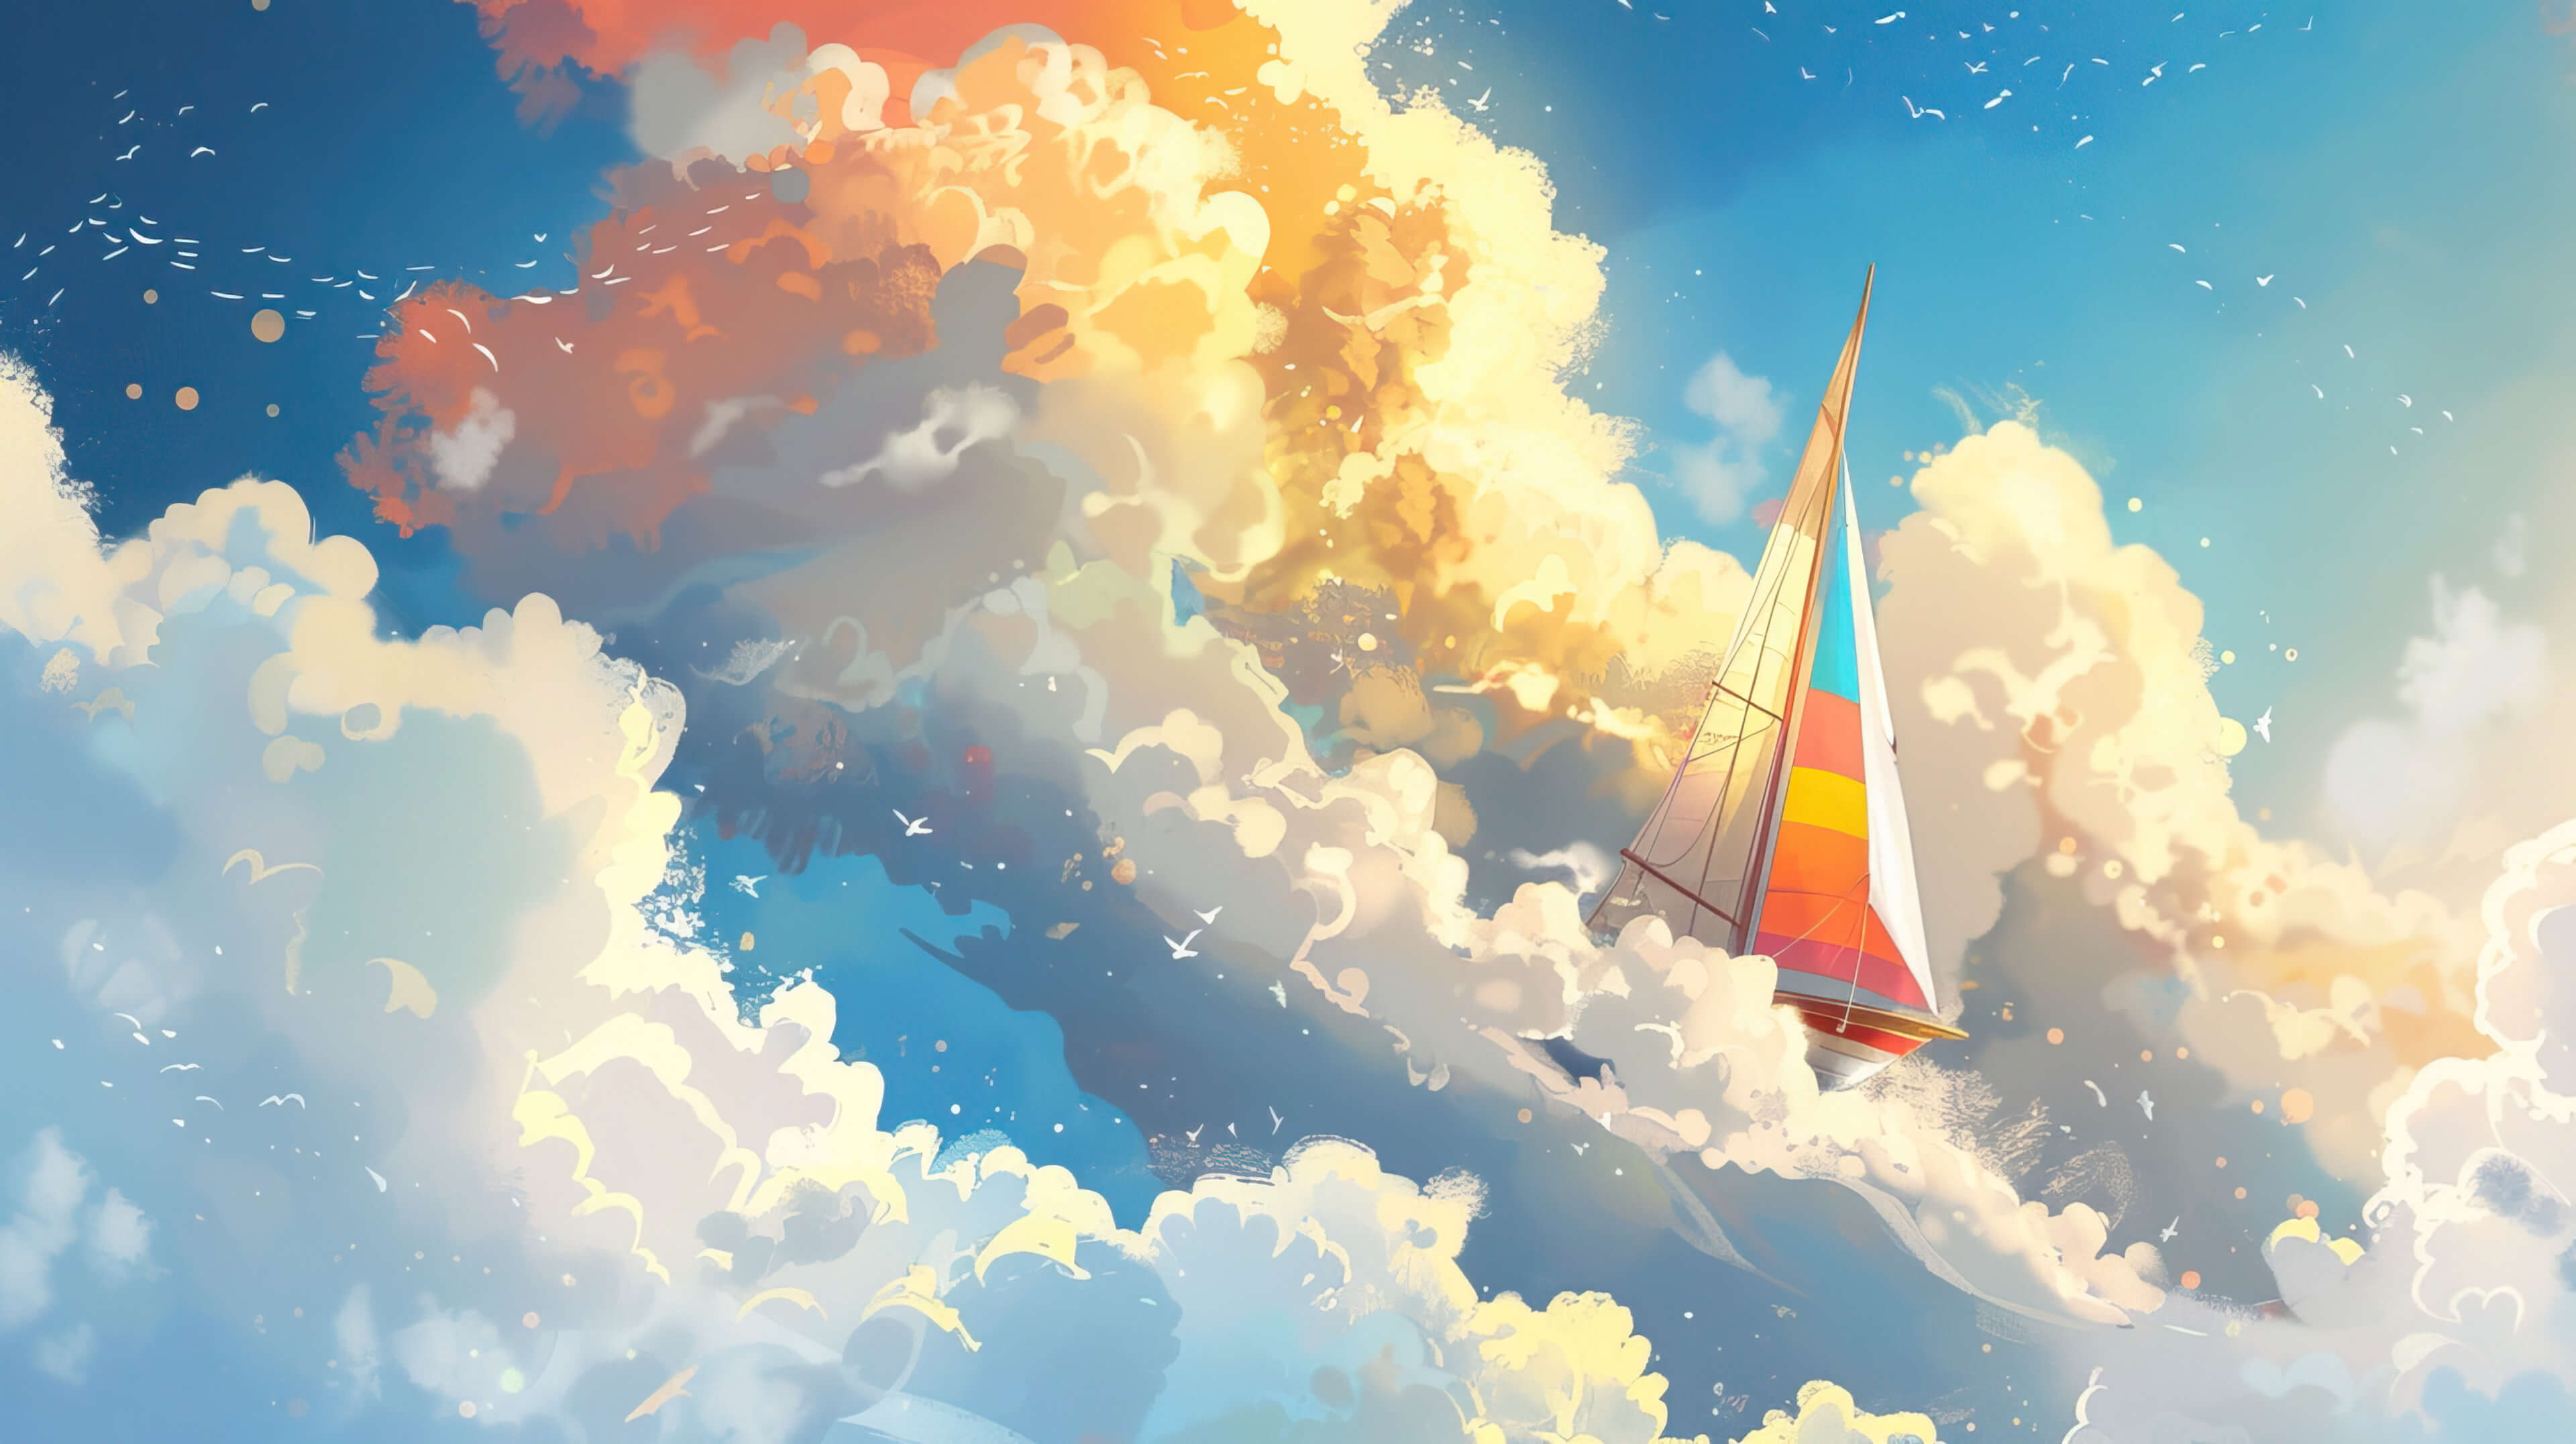 A whimsical illustration of a sailboat sailing through the sky amidst fluffy clouds, its colorful sails adding a touch of magic to the scene